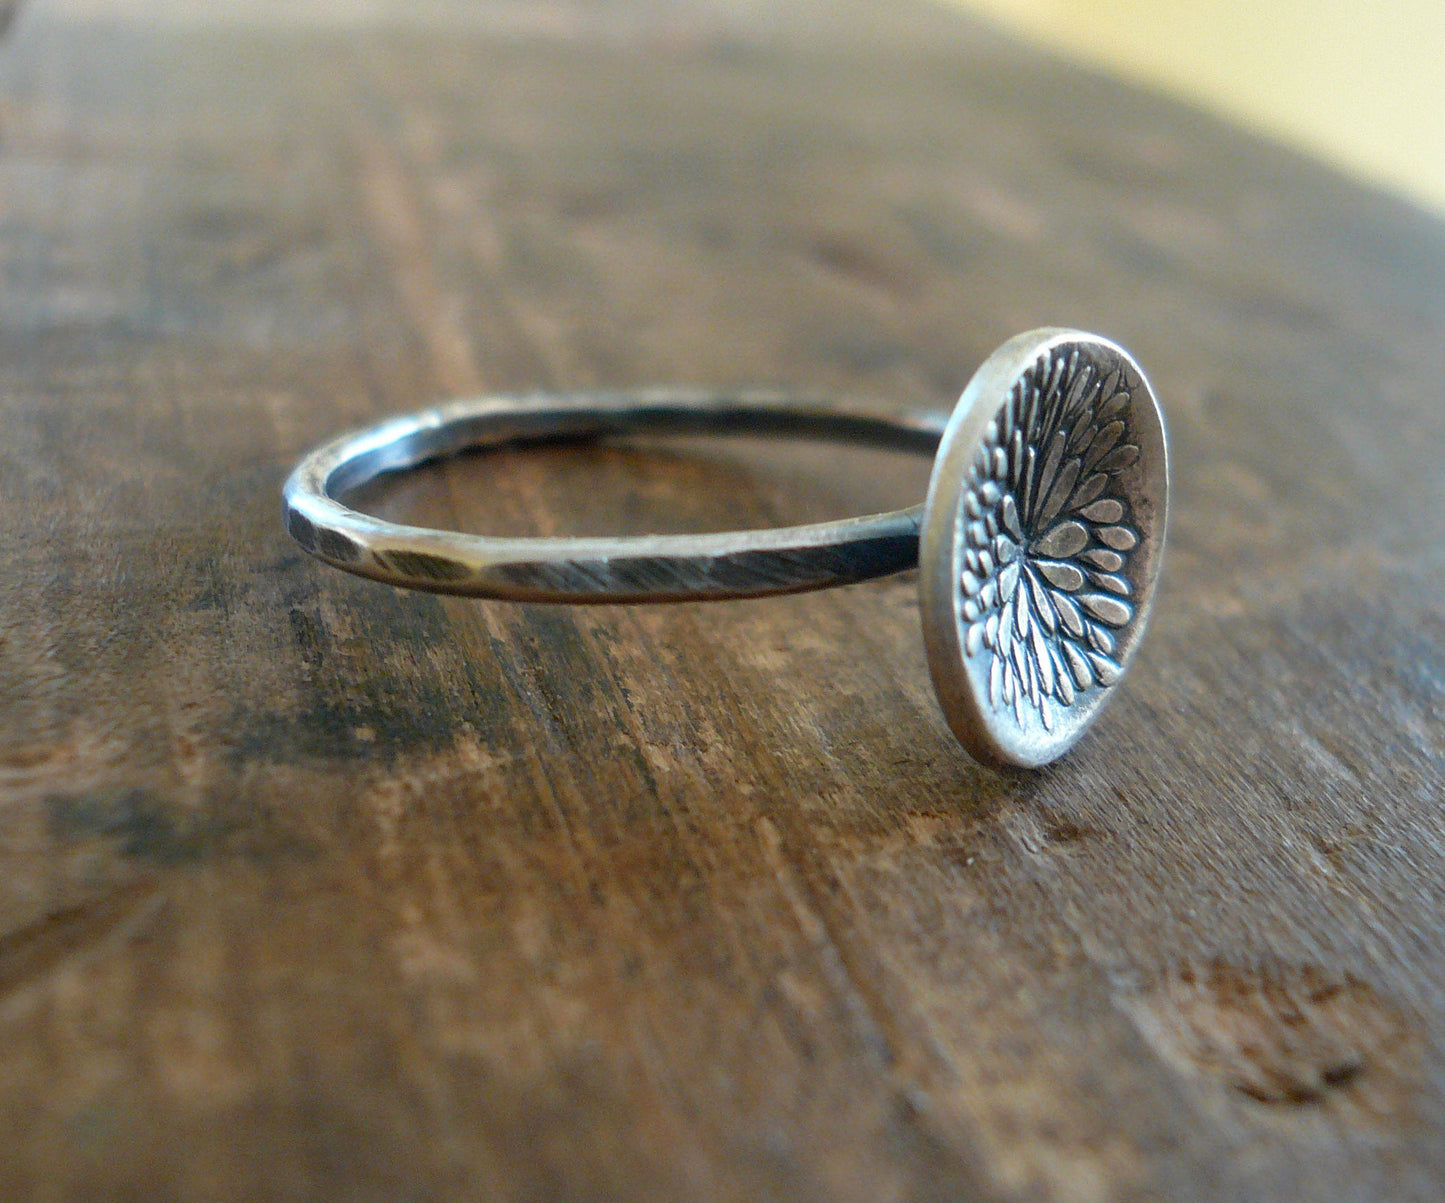 Bloom Ring - Sterling & Fine Silver Oxidized Hammered Ring. Hand made by jNic Designs